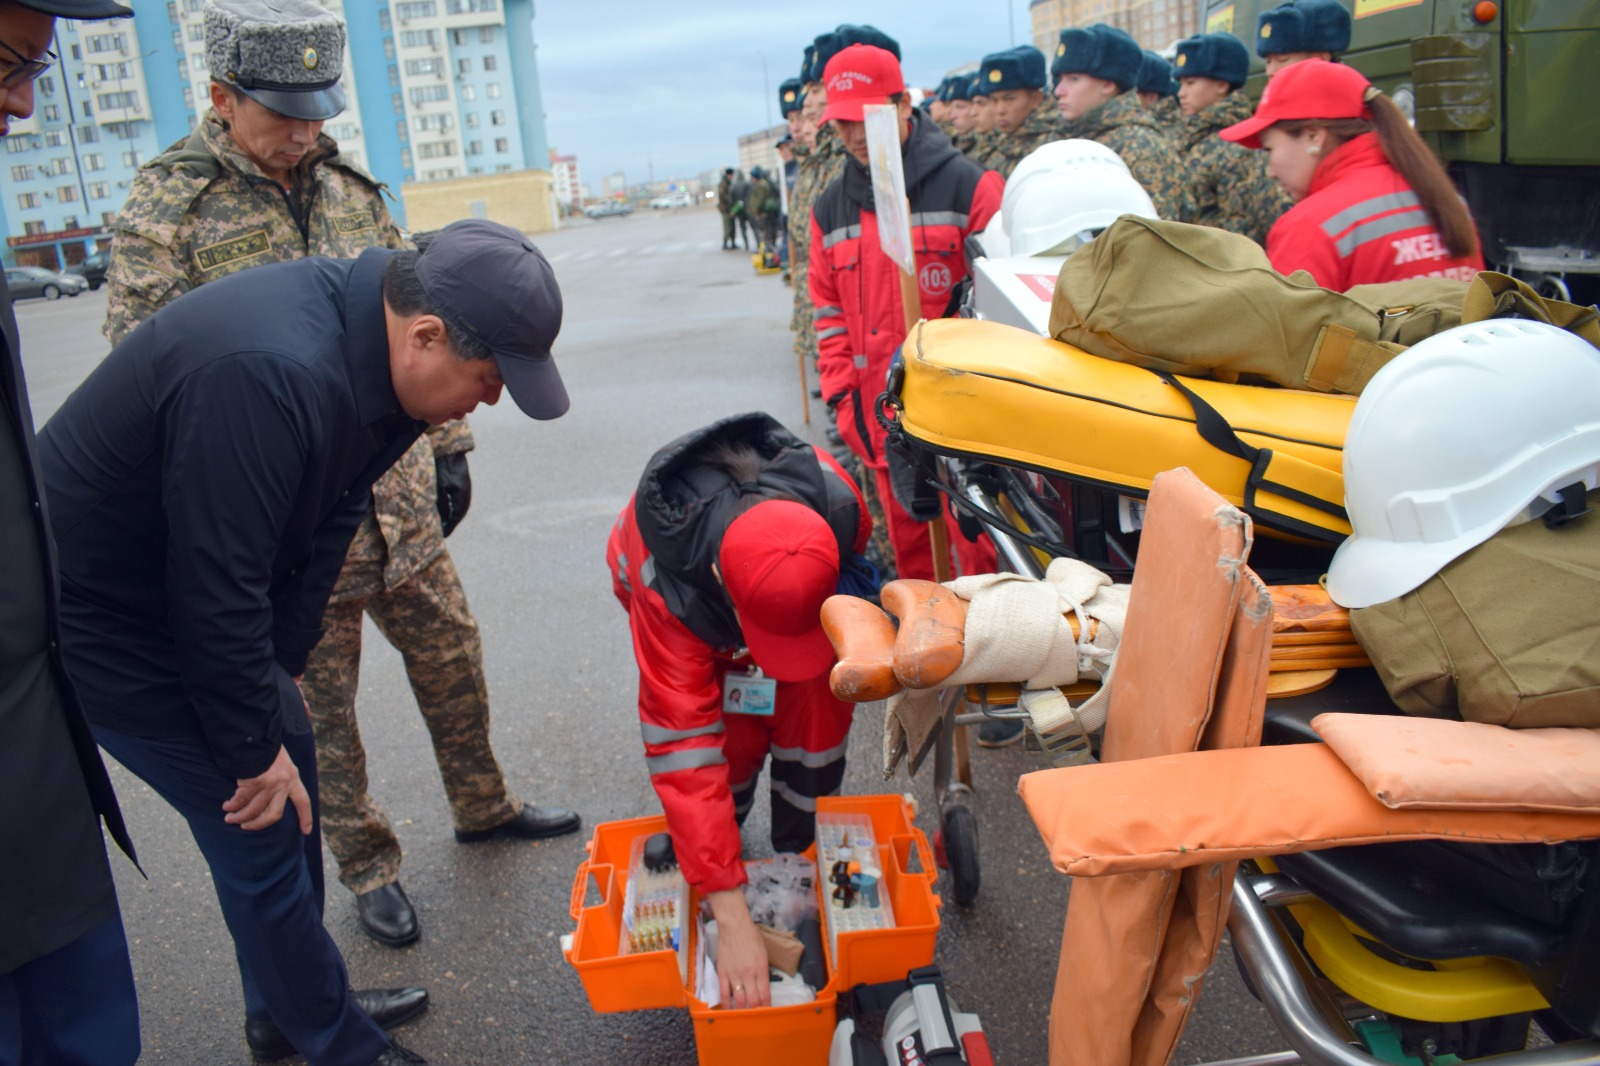 The readiness of emergency response teams was checked